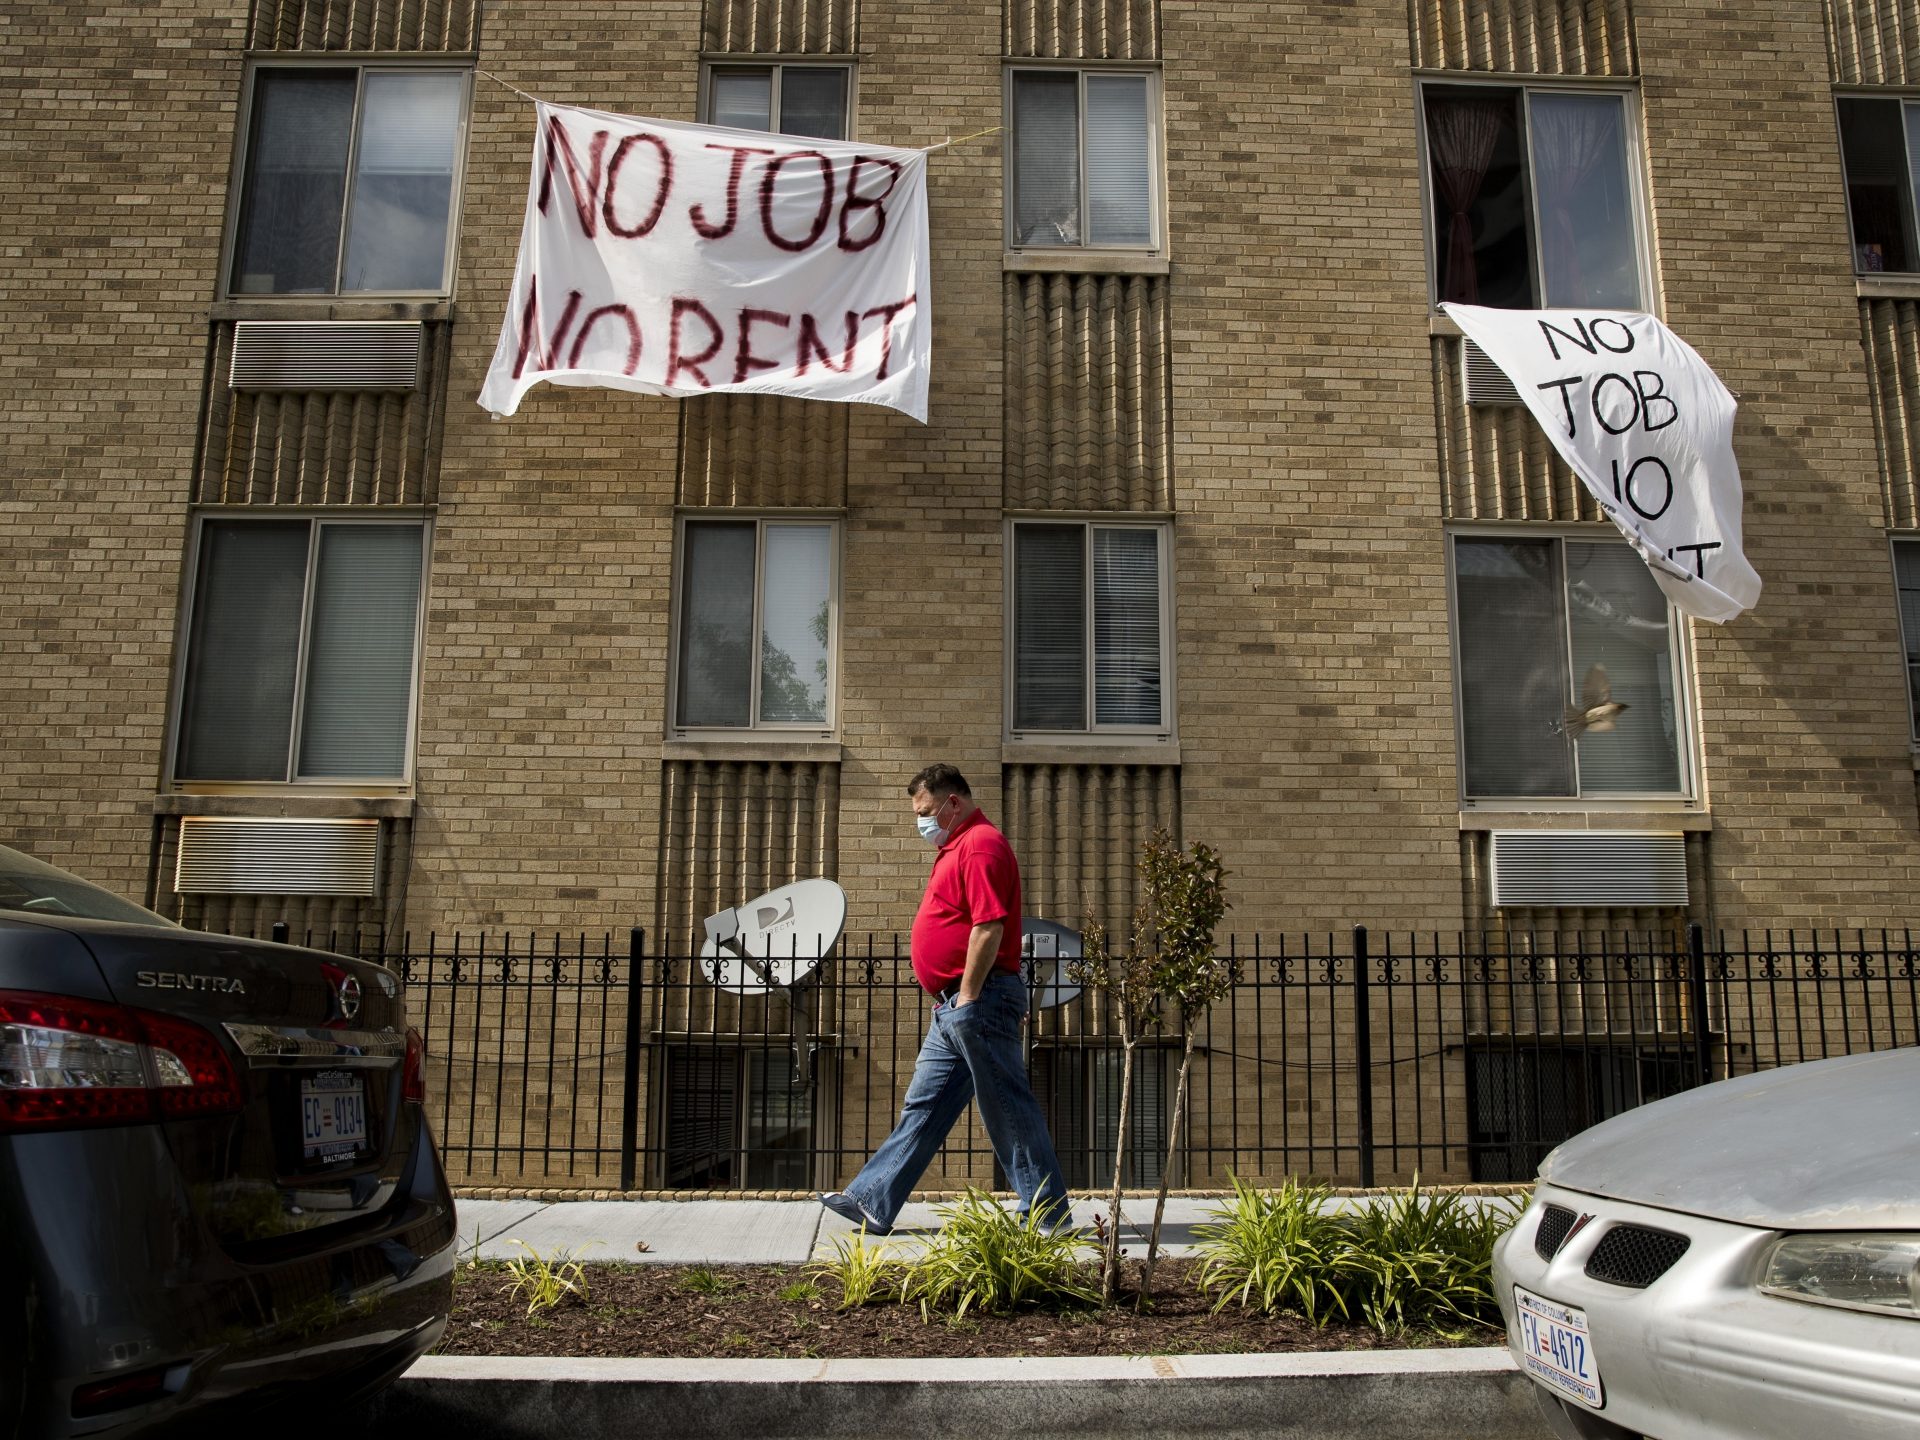 FILE PHOTO: In this May 20, 2020, file photo, signs that read "No Job No Rent" hang from the windows of an apartment building during the coronavirus pandemic in Northwest Washington.